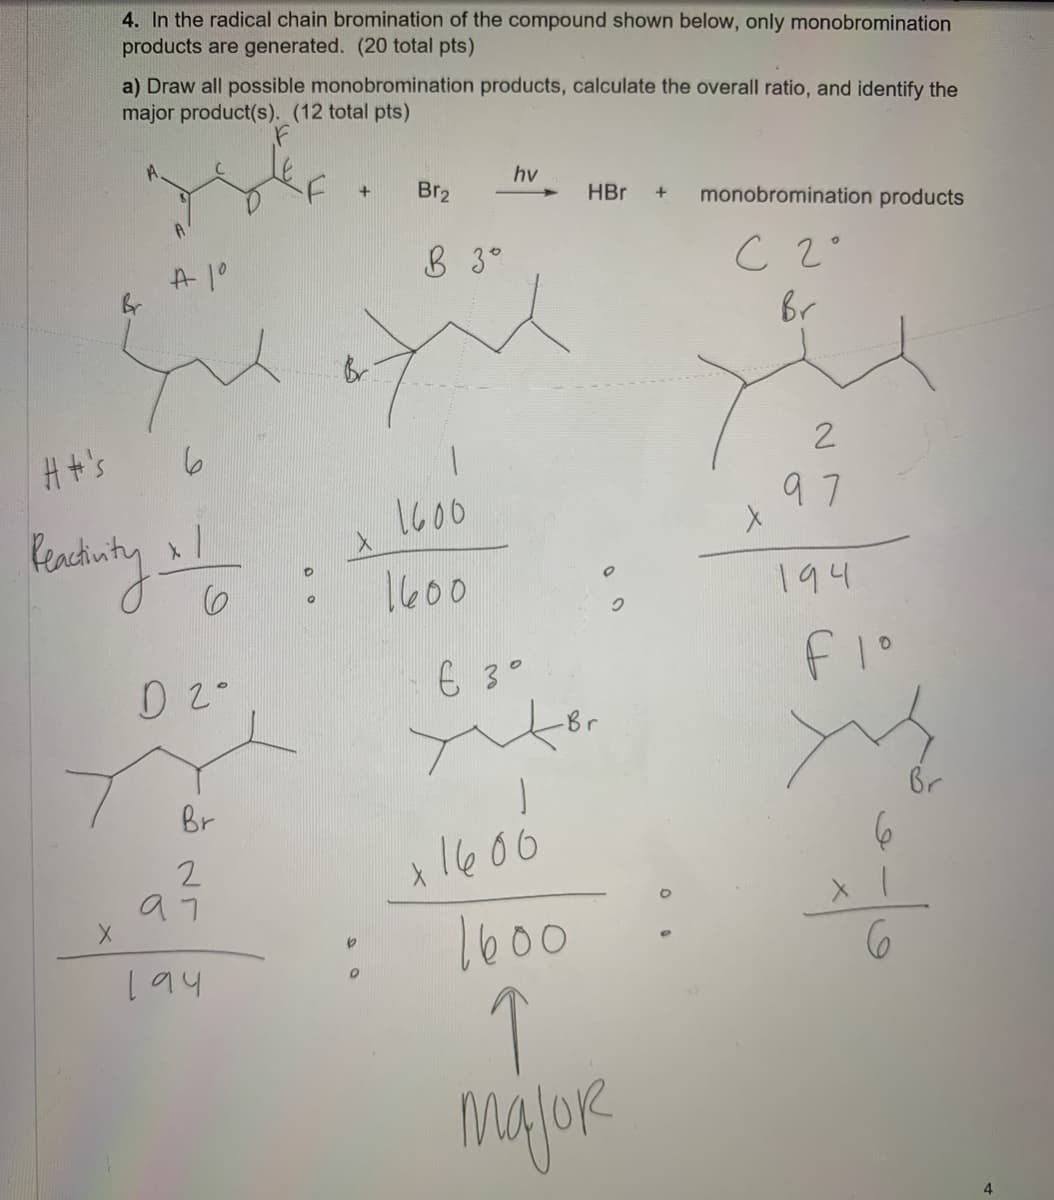 4. In the radical chain bromination of the compound shown below, only monobromination
products are generated. (20 total pts)
a) Draw all possible monobromination products, calculate the overall ratio, and identify the
major product(s). (12 total pts)
hv
Br2
HBr
monobromination products
A1°
8 3°
C 2°
Br
Ht's
2
1600
97
1600
194
6 3°
-Br
Br
Br
1600
1600
194
majoR
4.
